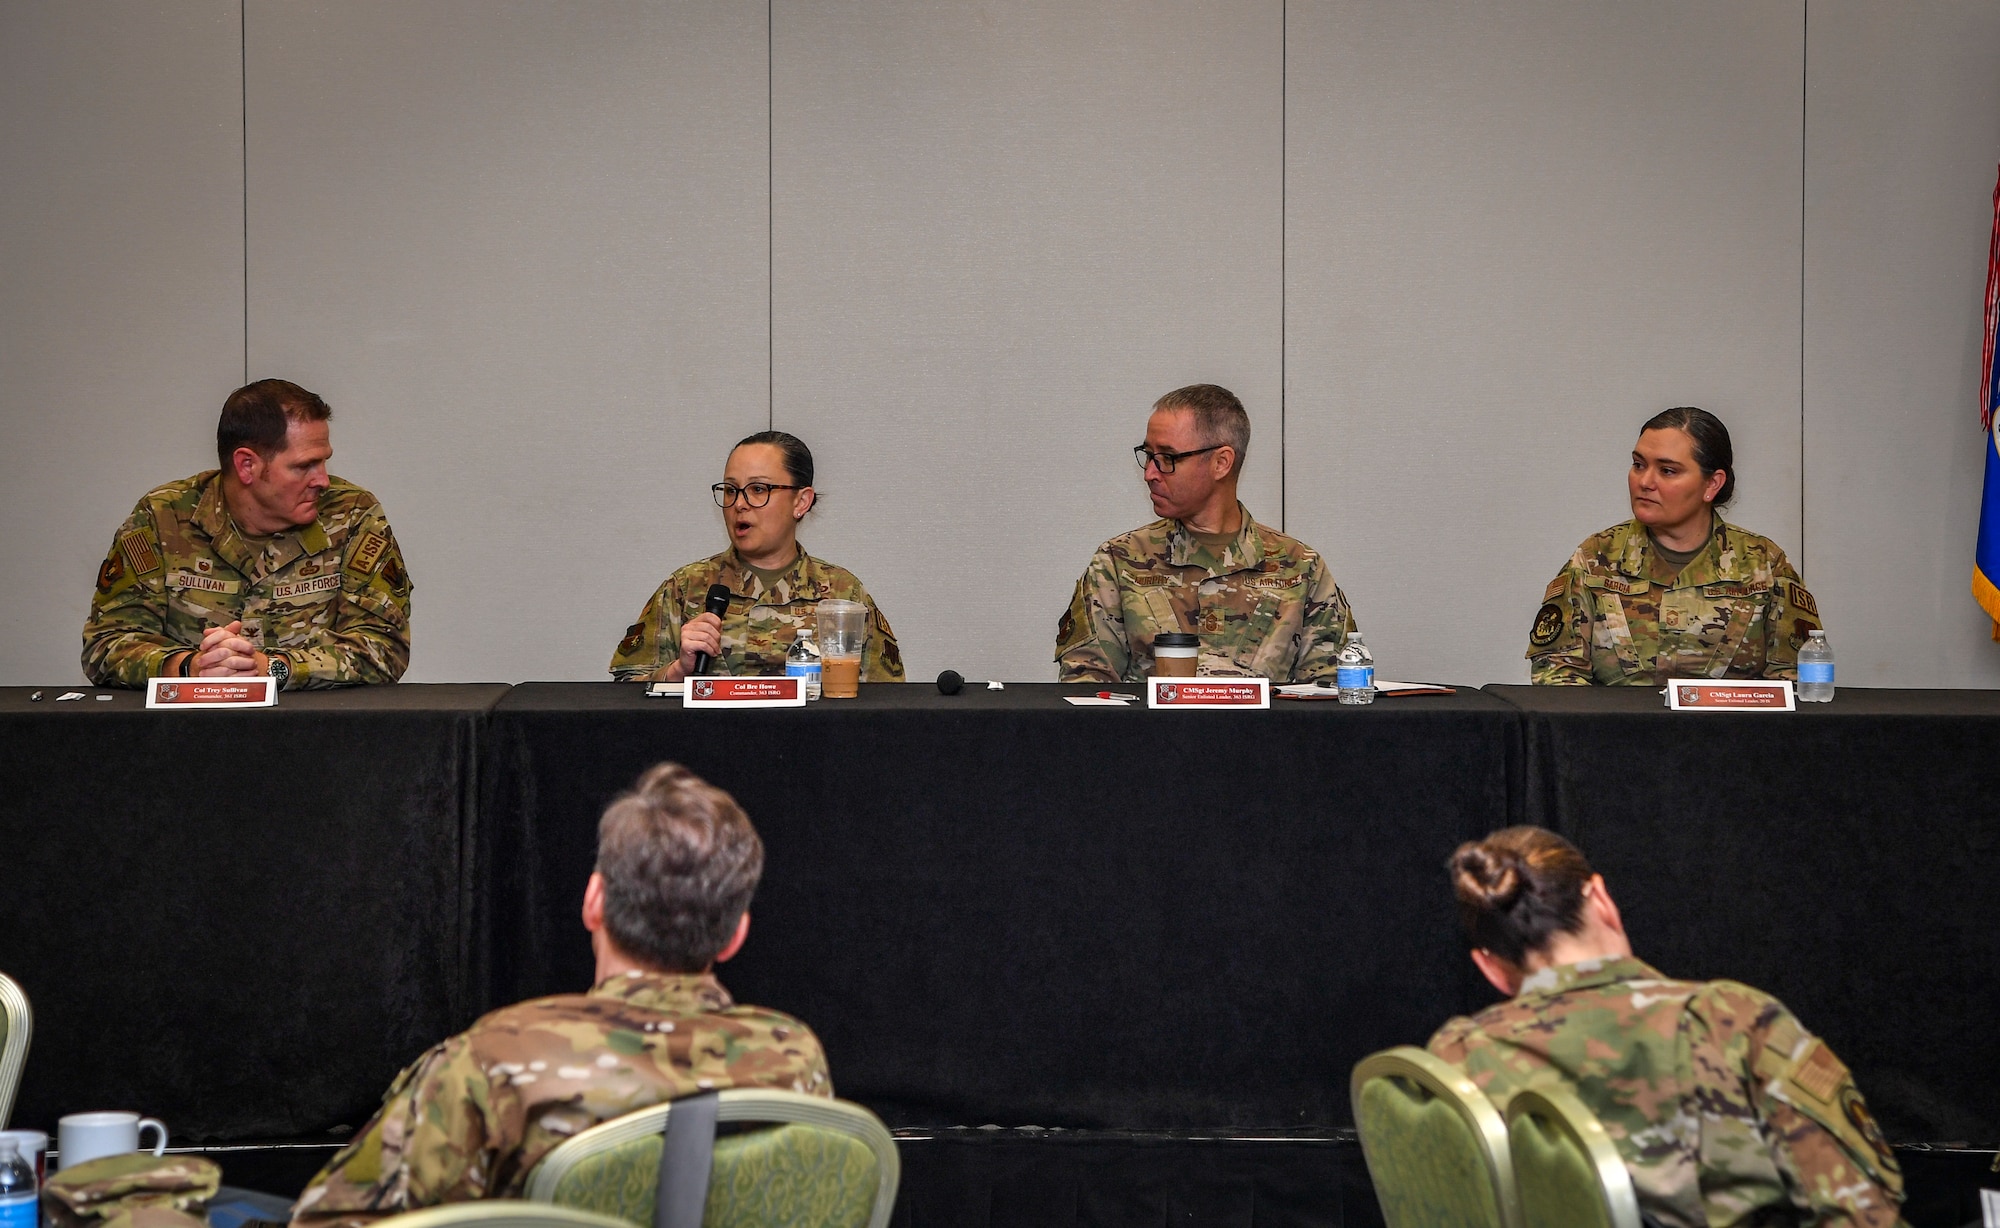 Four individuals sit at a table and talk to group with a mic.